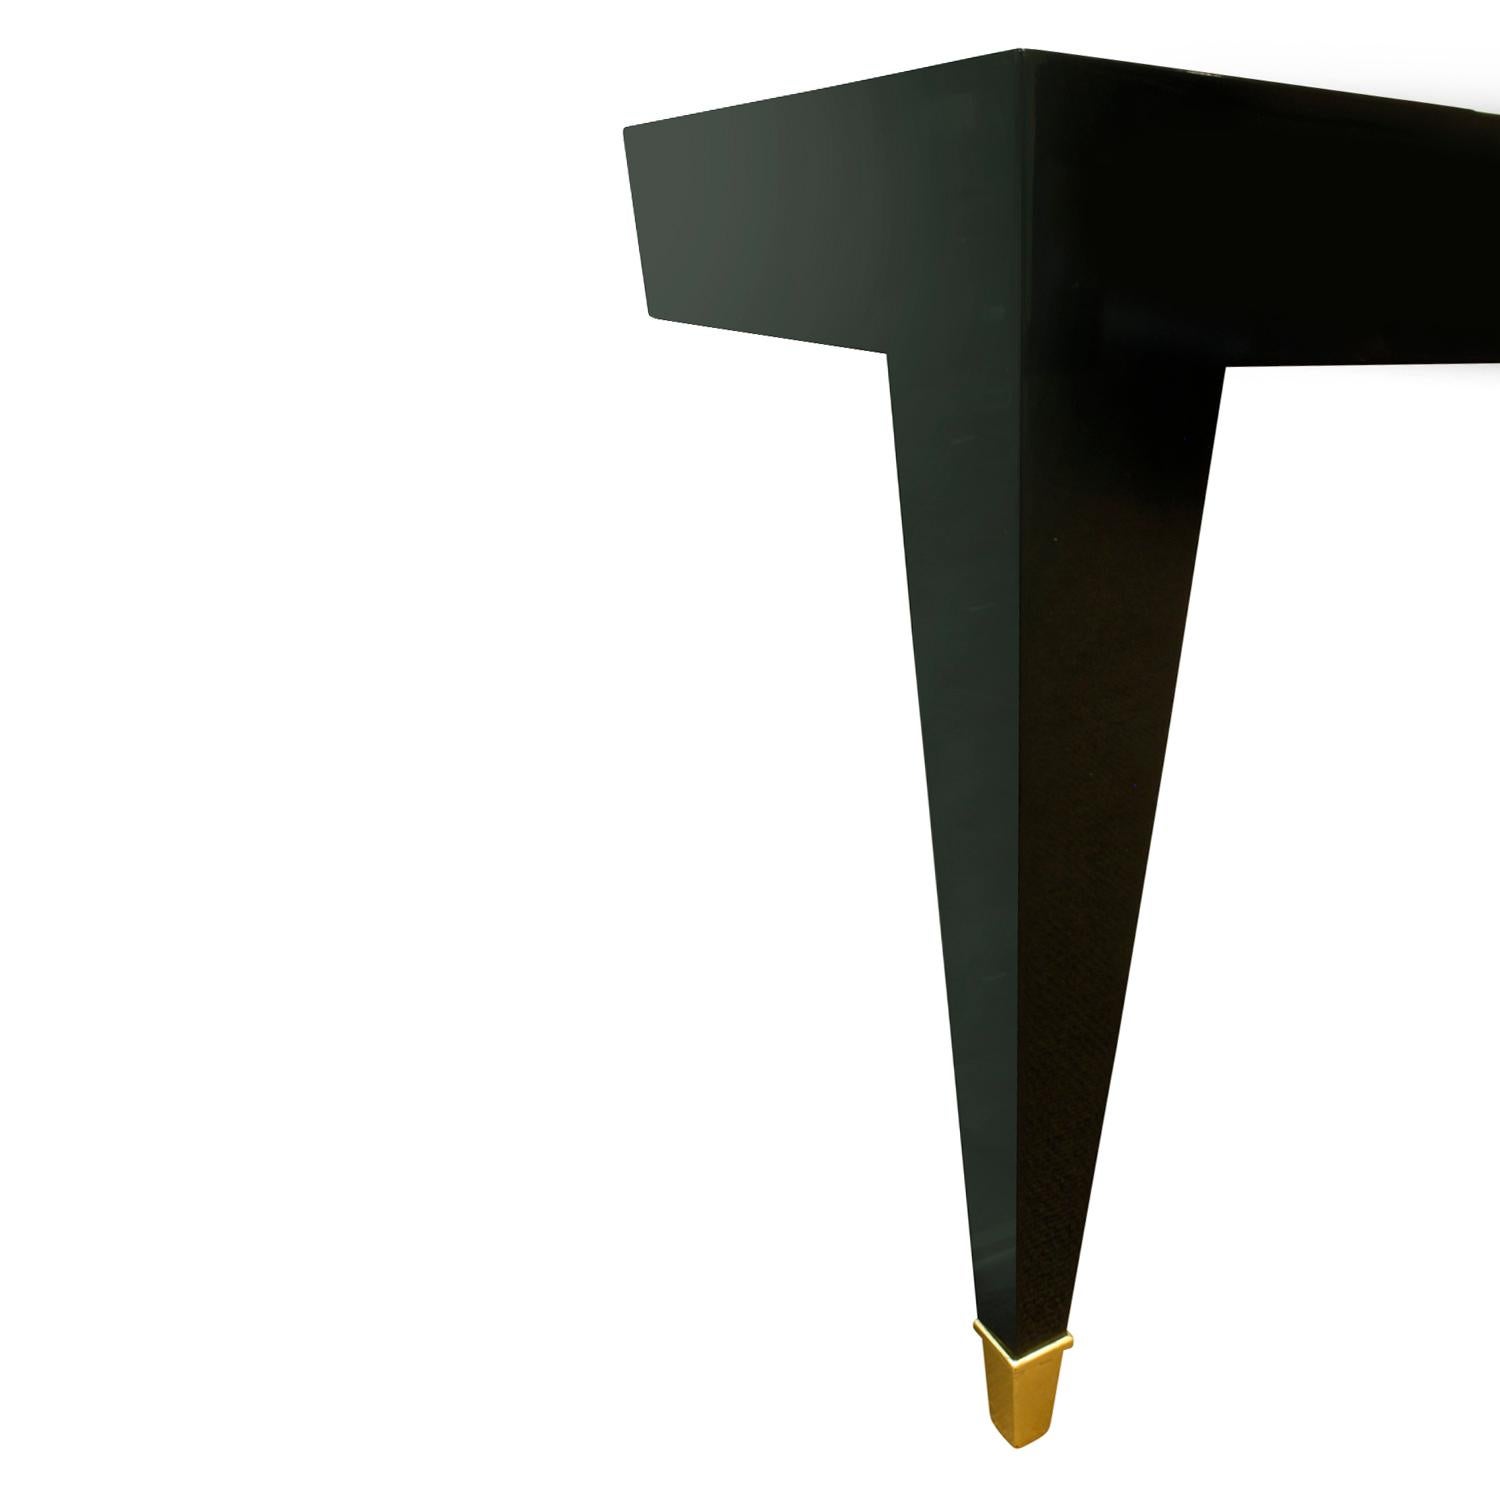 Late 20th Century Pace Black Lacquer Console Table with Inset Granite Top and Brass Sabots, 1980s For Sale